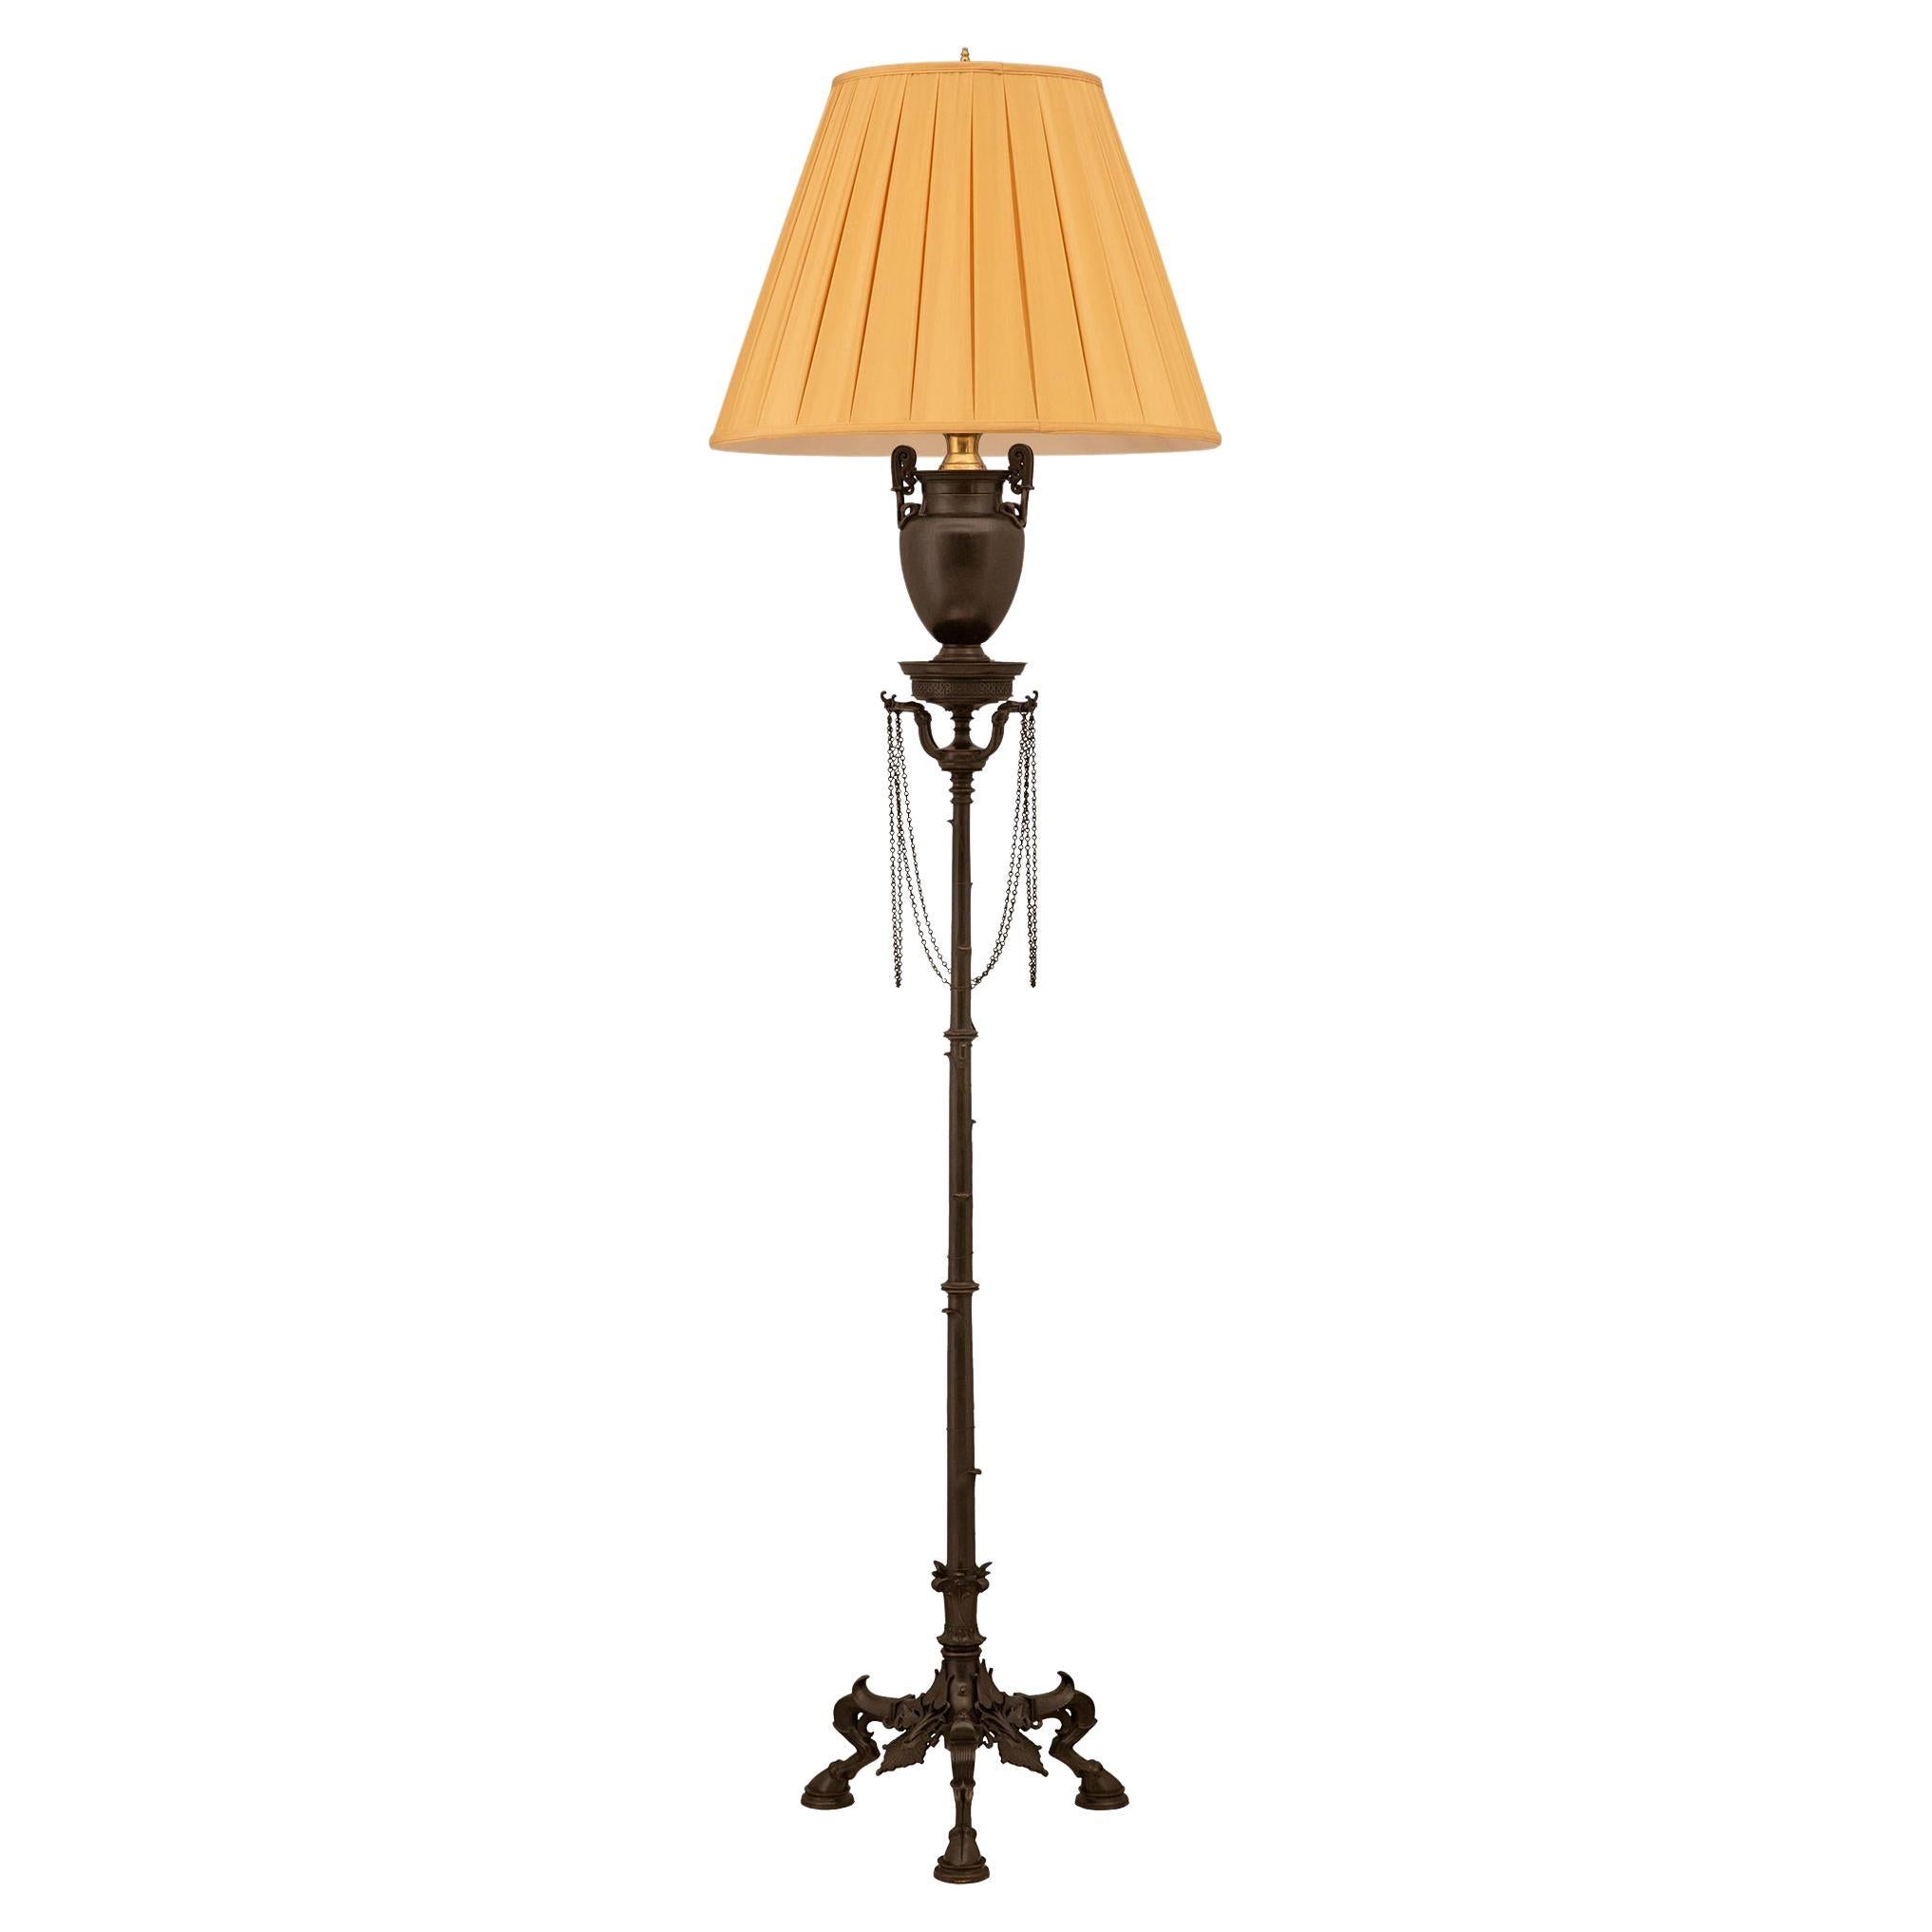 French Mid-19th Century Neoclassical Style Solid Bronze and Ormolu Floor Lamp